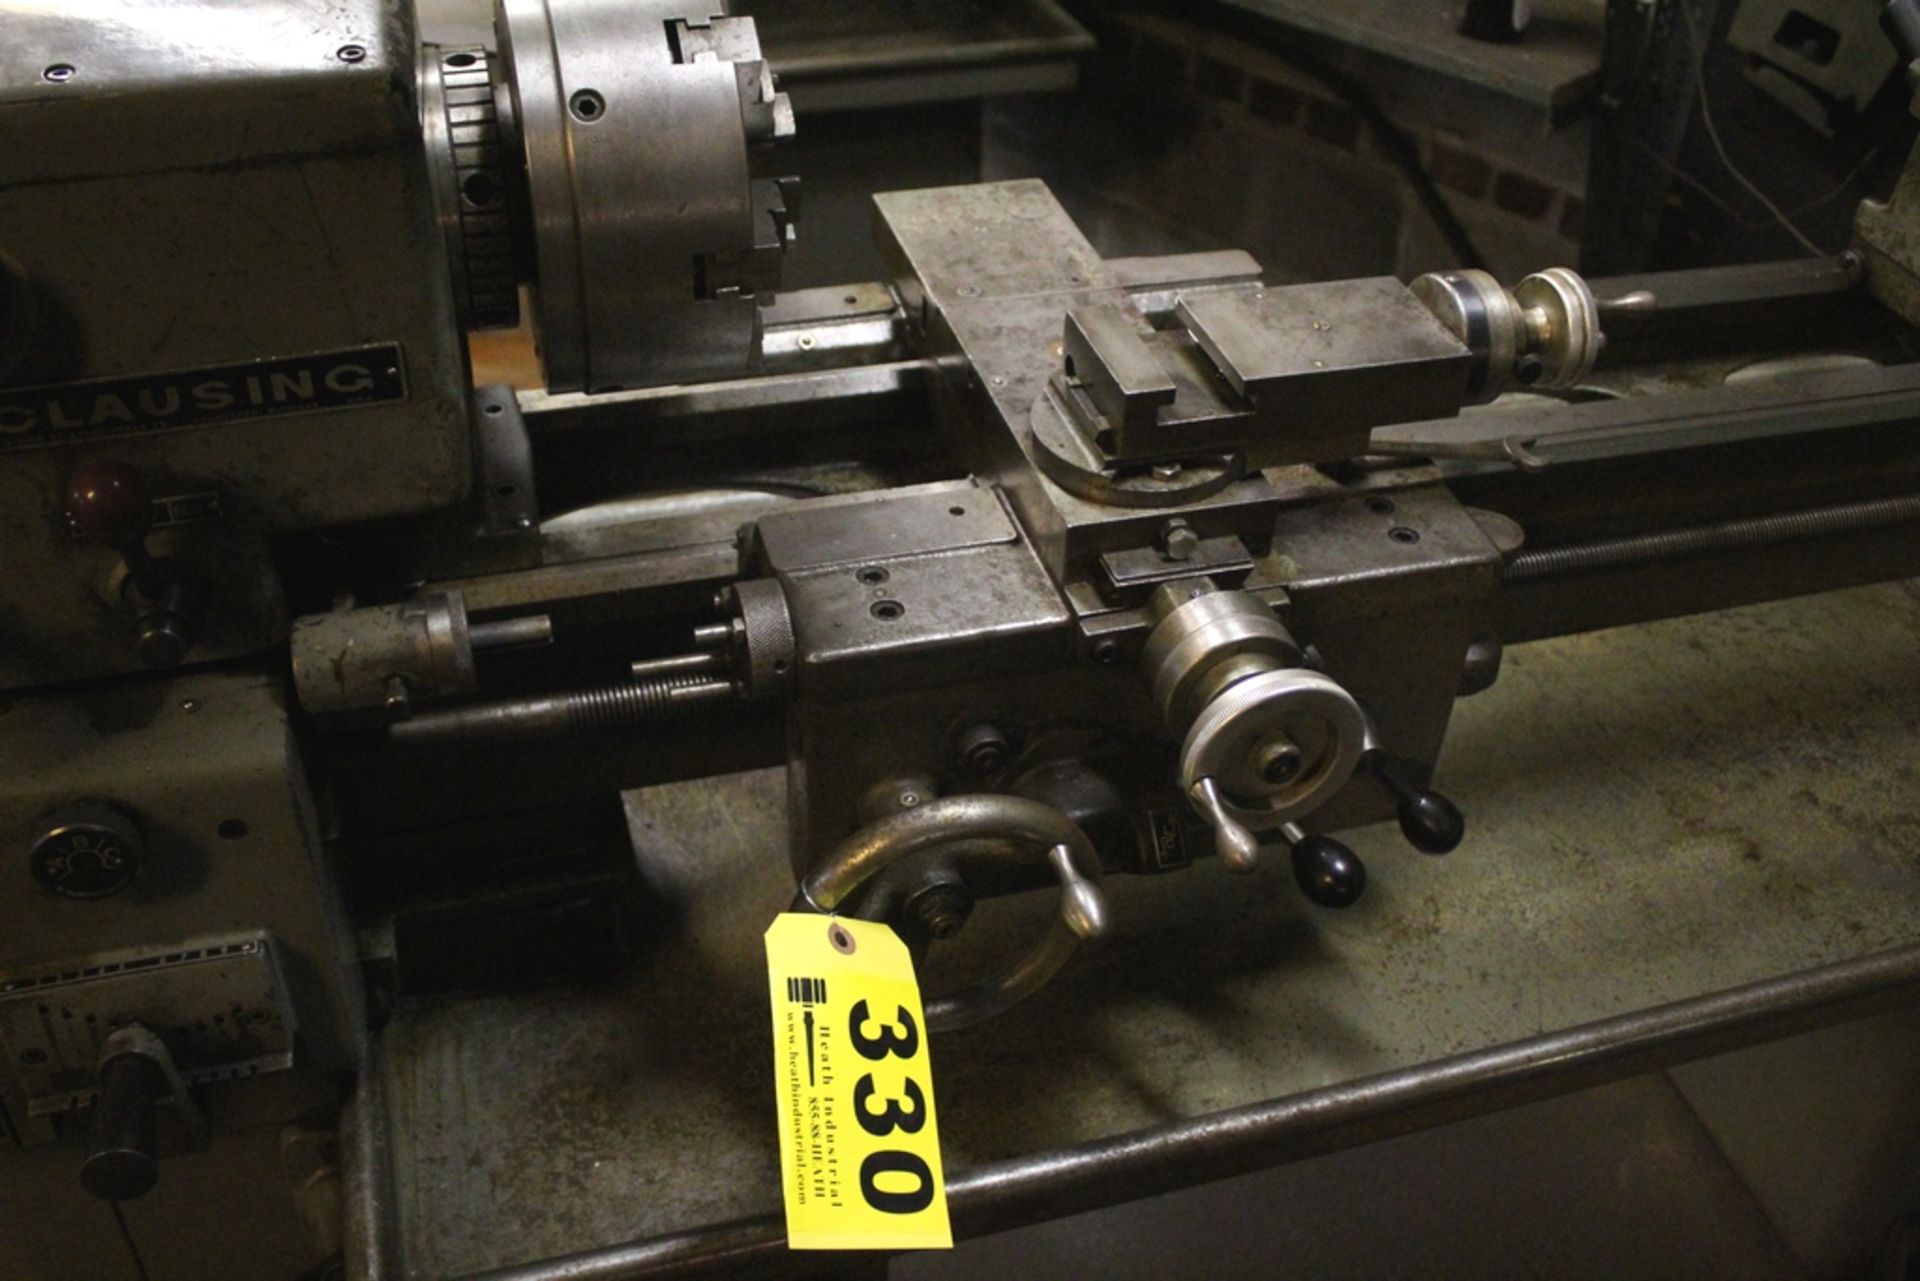 CLAUSING TOOLROOM LATHE, INCH THREADING, STEADY REST, TAIL STOCK - Image 4 of 5